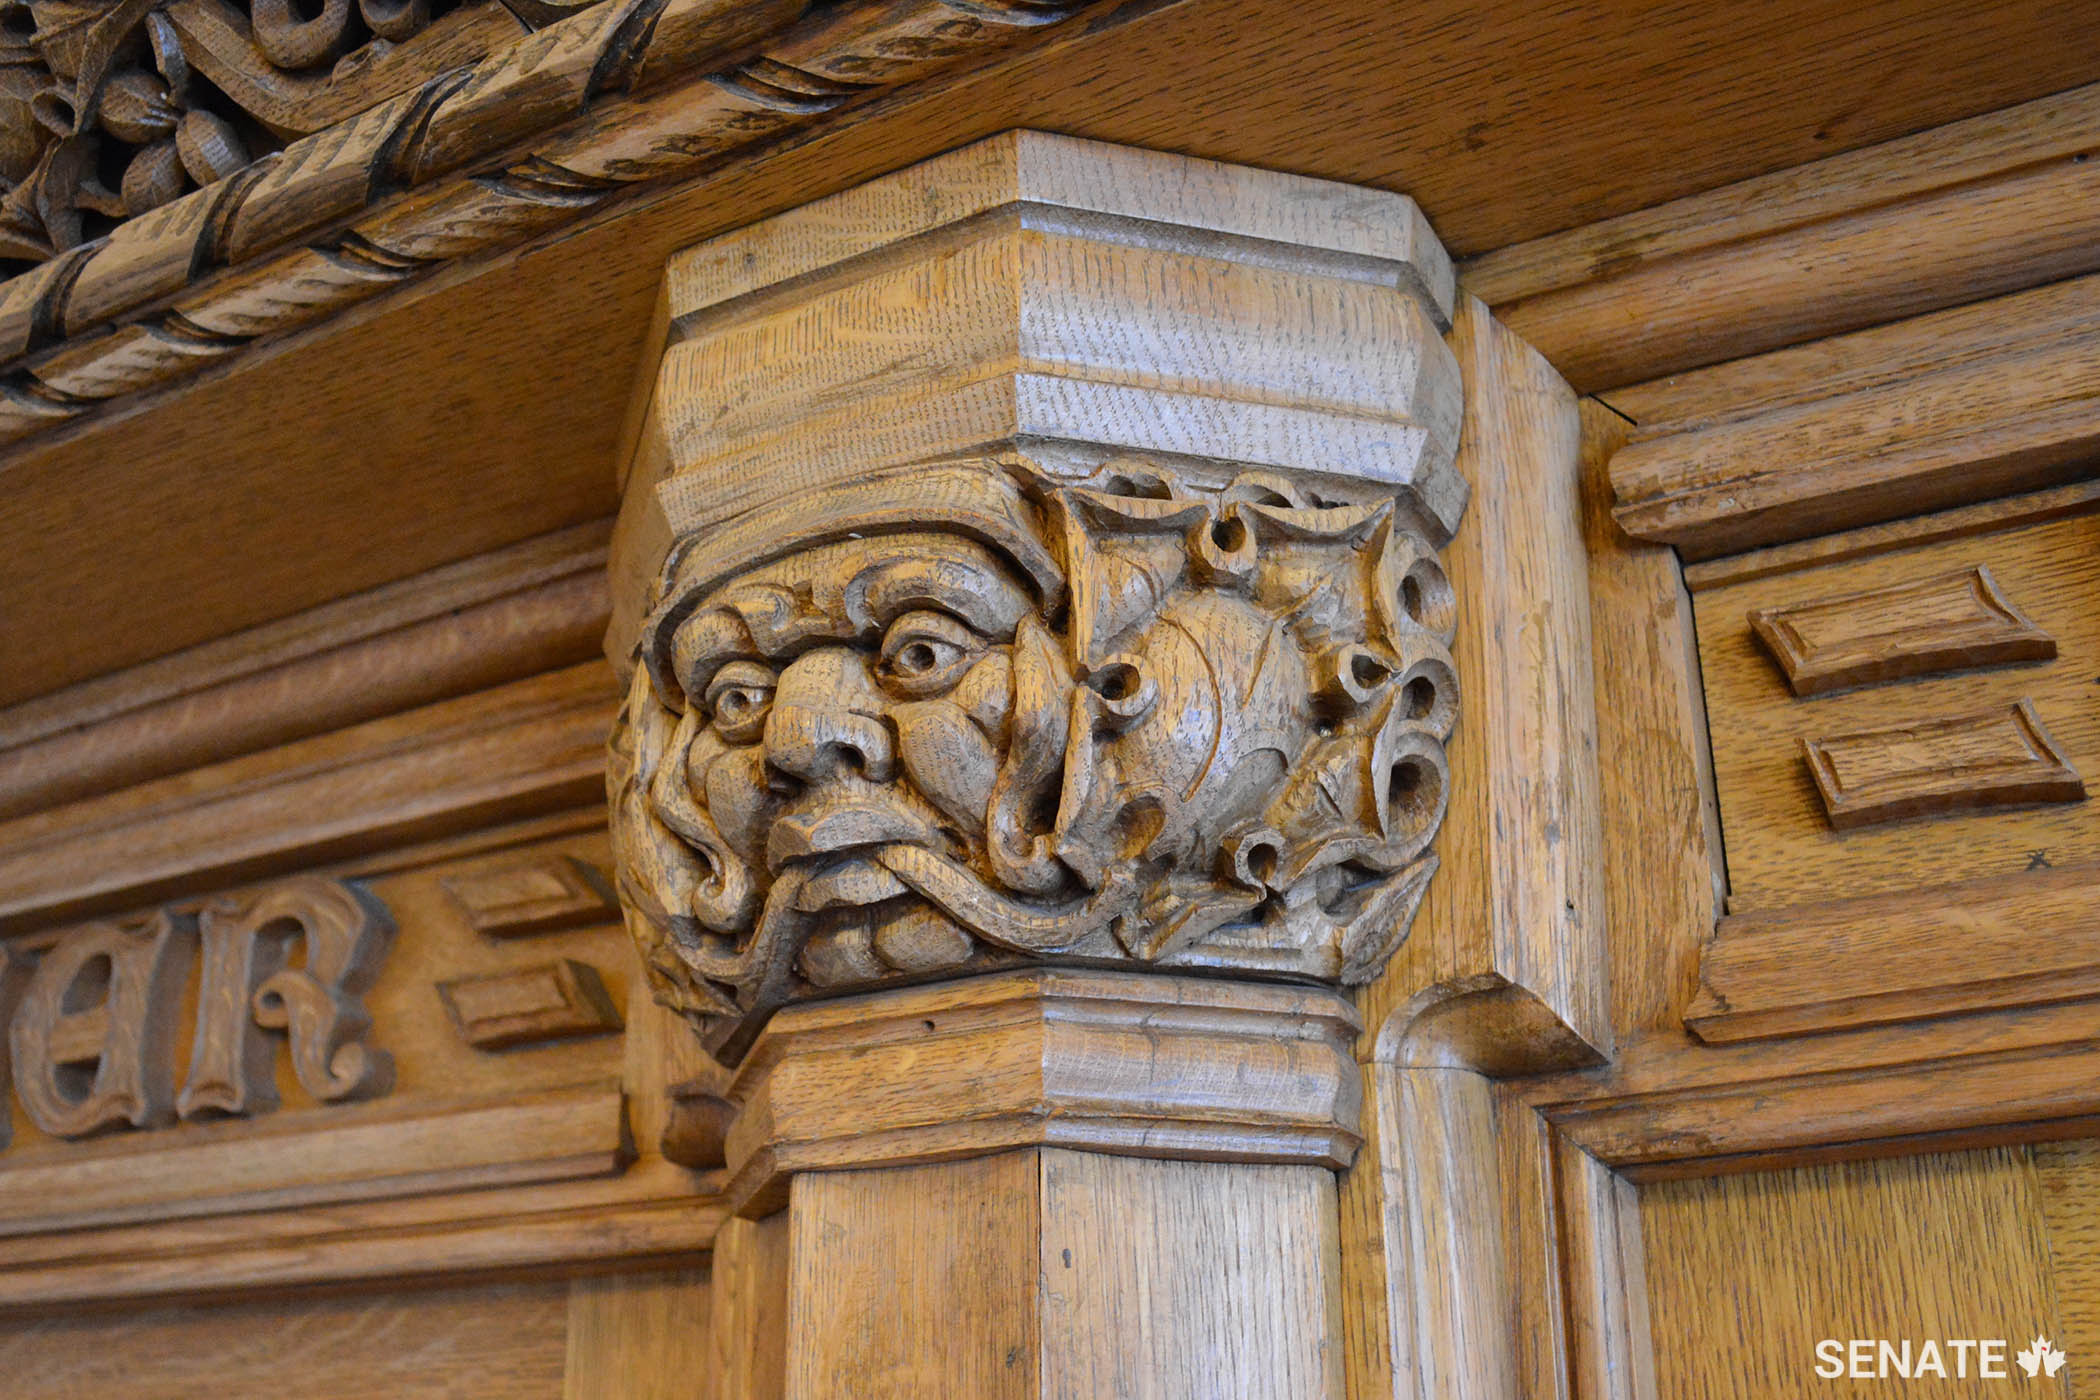 This Green Man in the Senate Speaker’s chambers was carved by Montreal’s Bromsgrove Guild in the 1920s.